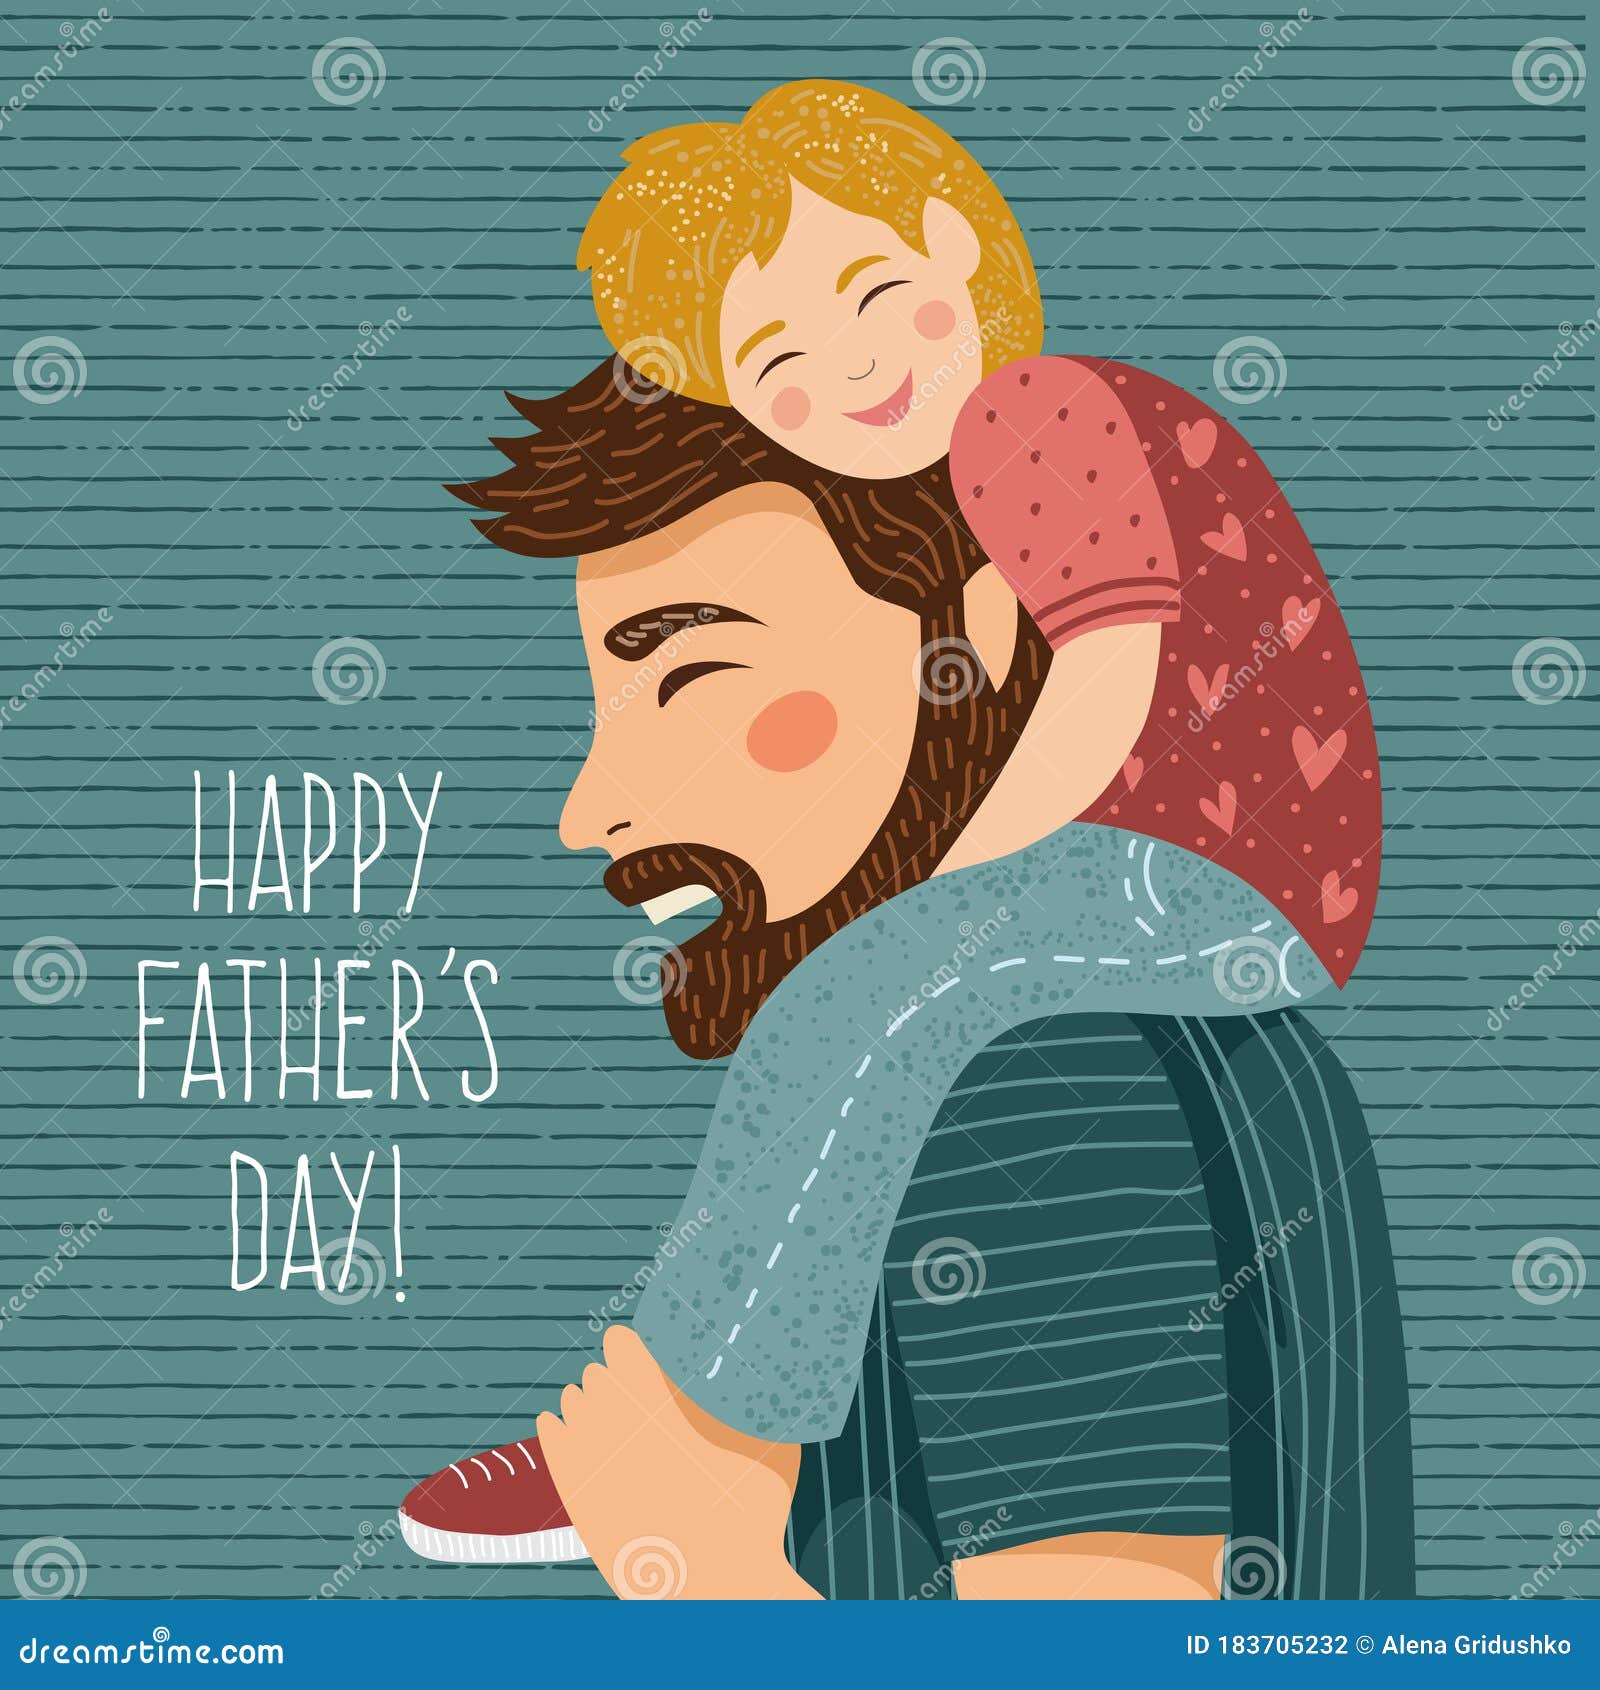 Fathers Day Drawing - How To Draw Father's Day Step By Step